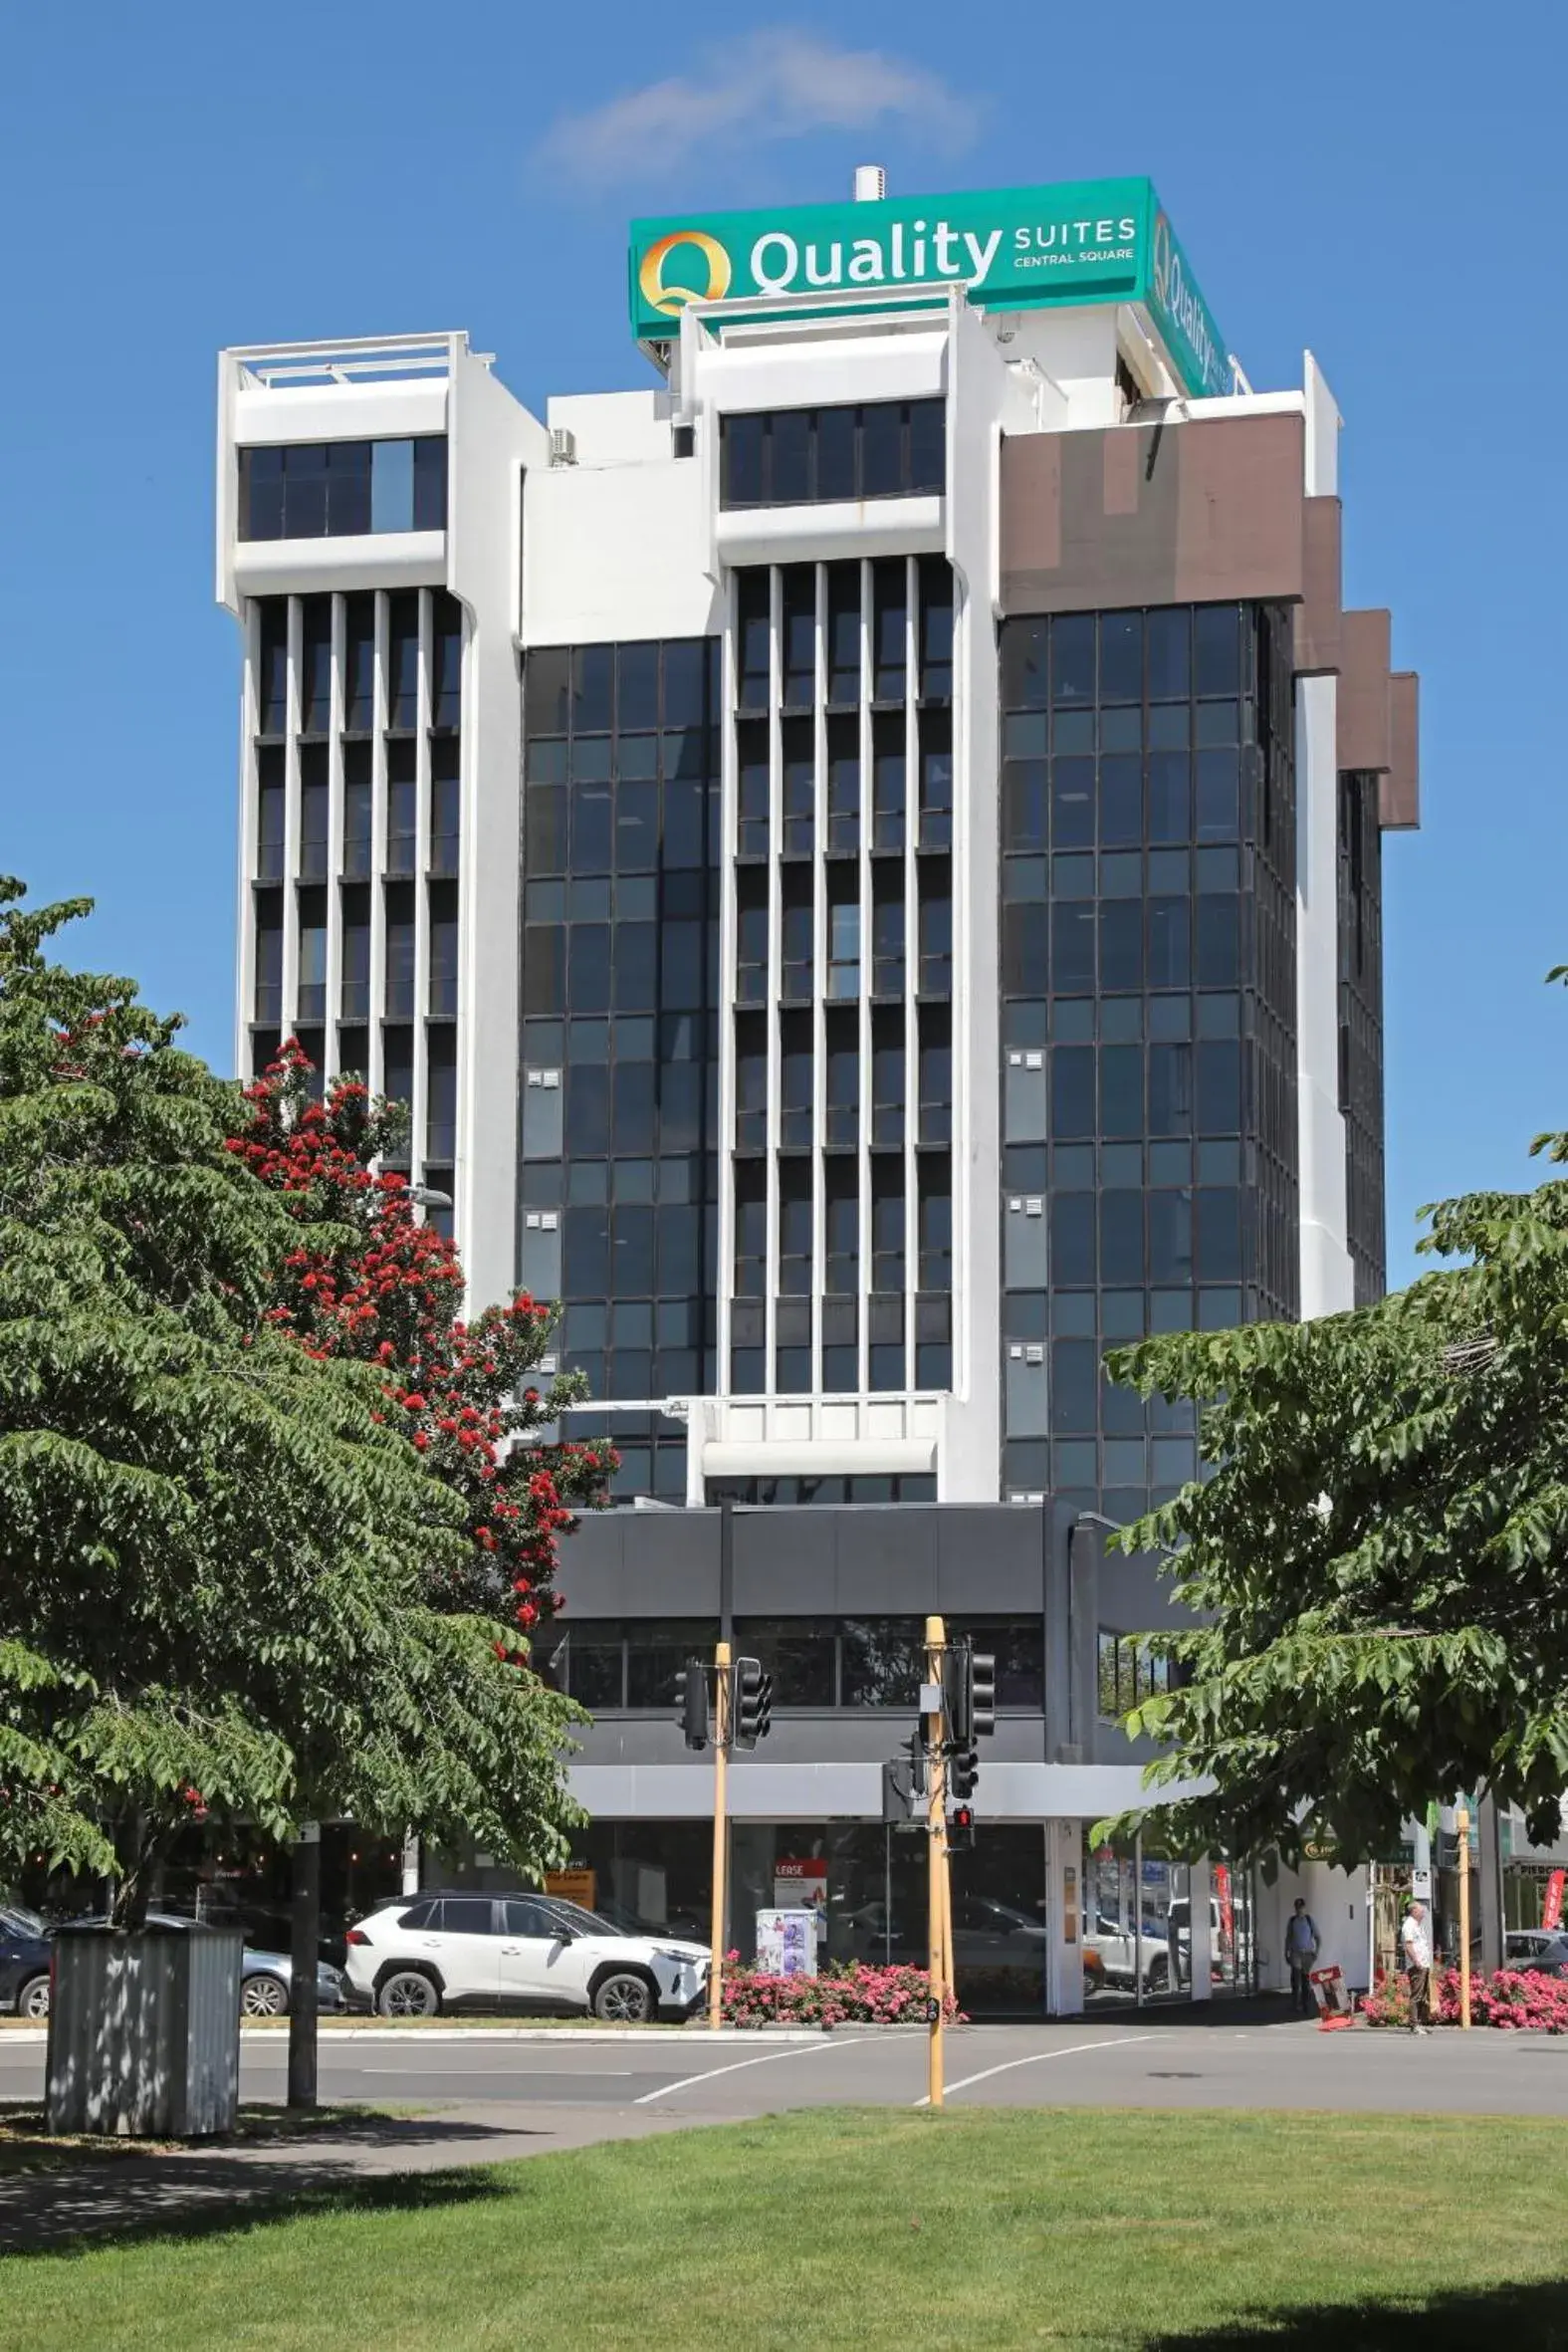 Property Building in Quality Suites Central Square